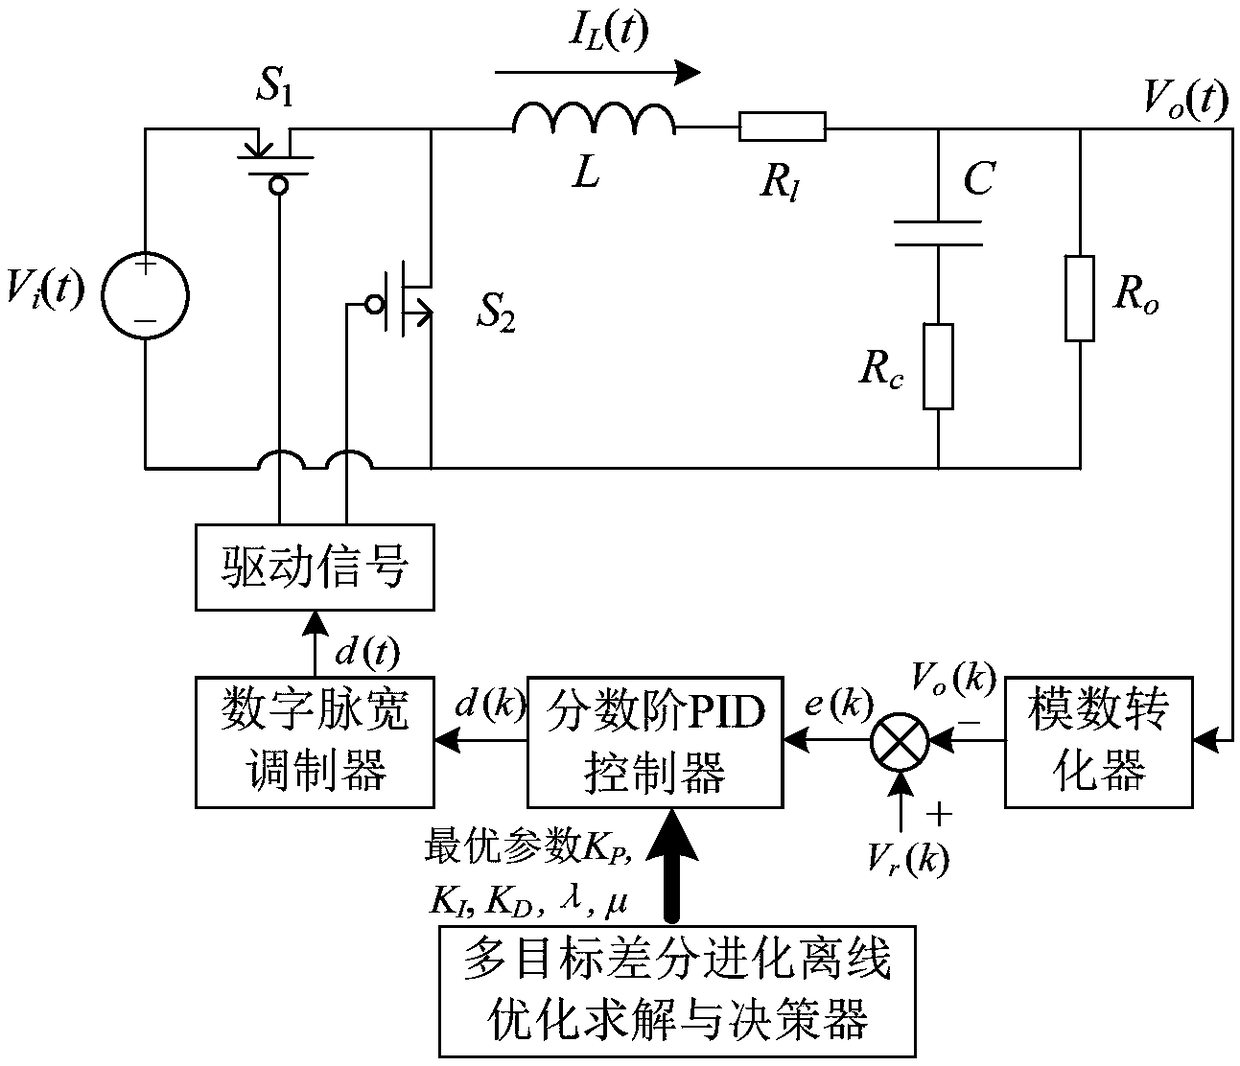 Multi-objective fractional order PID control method for DC buck converter